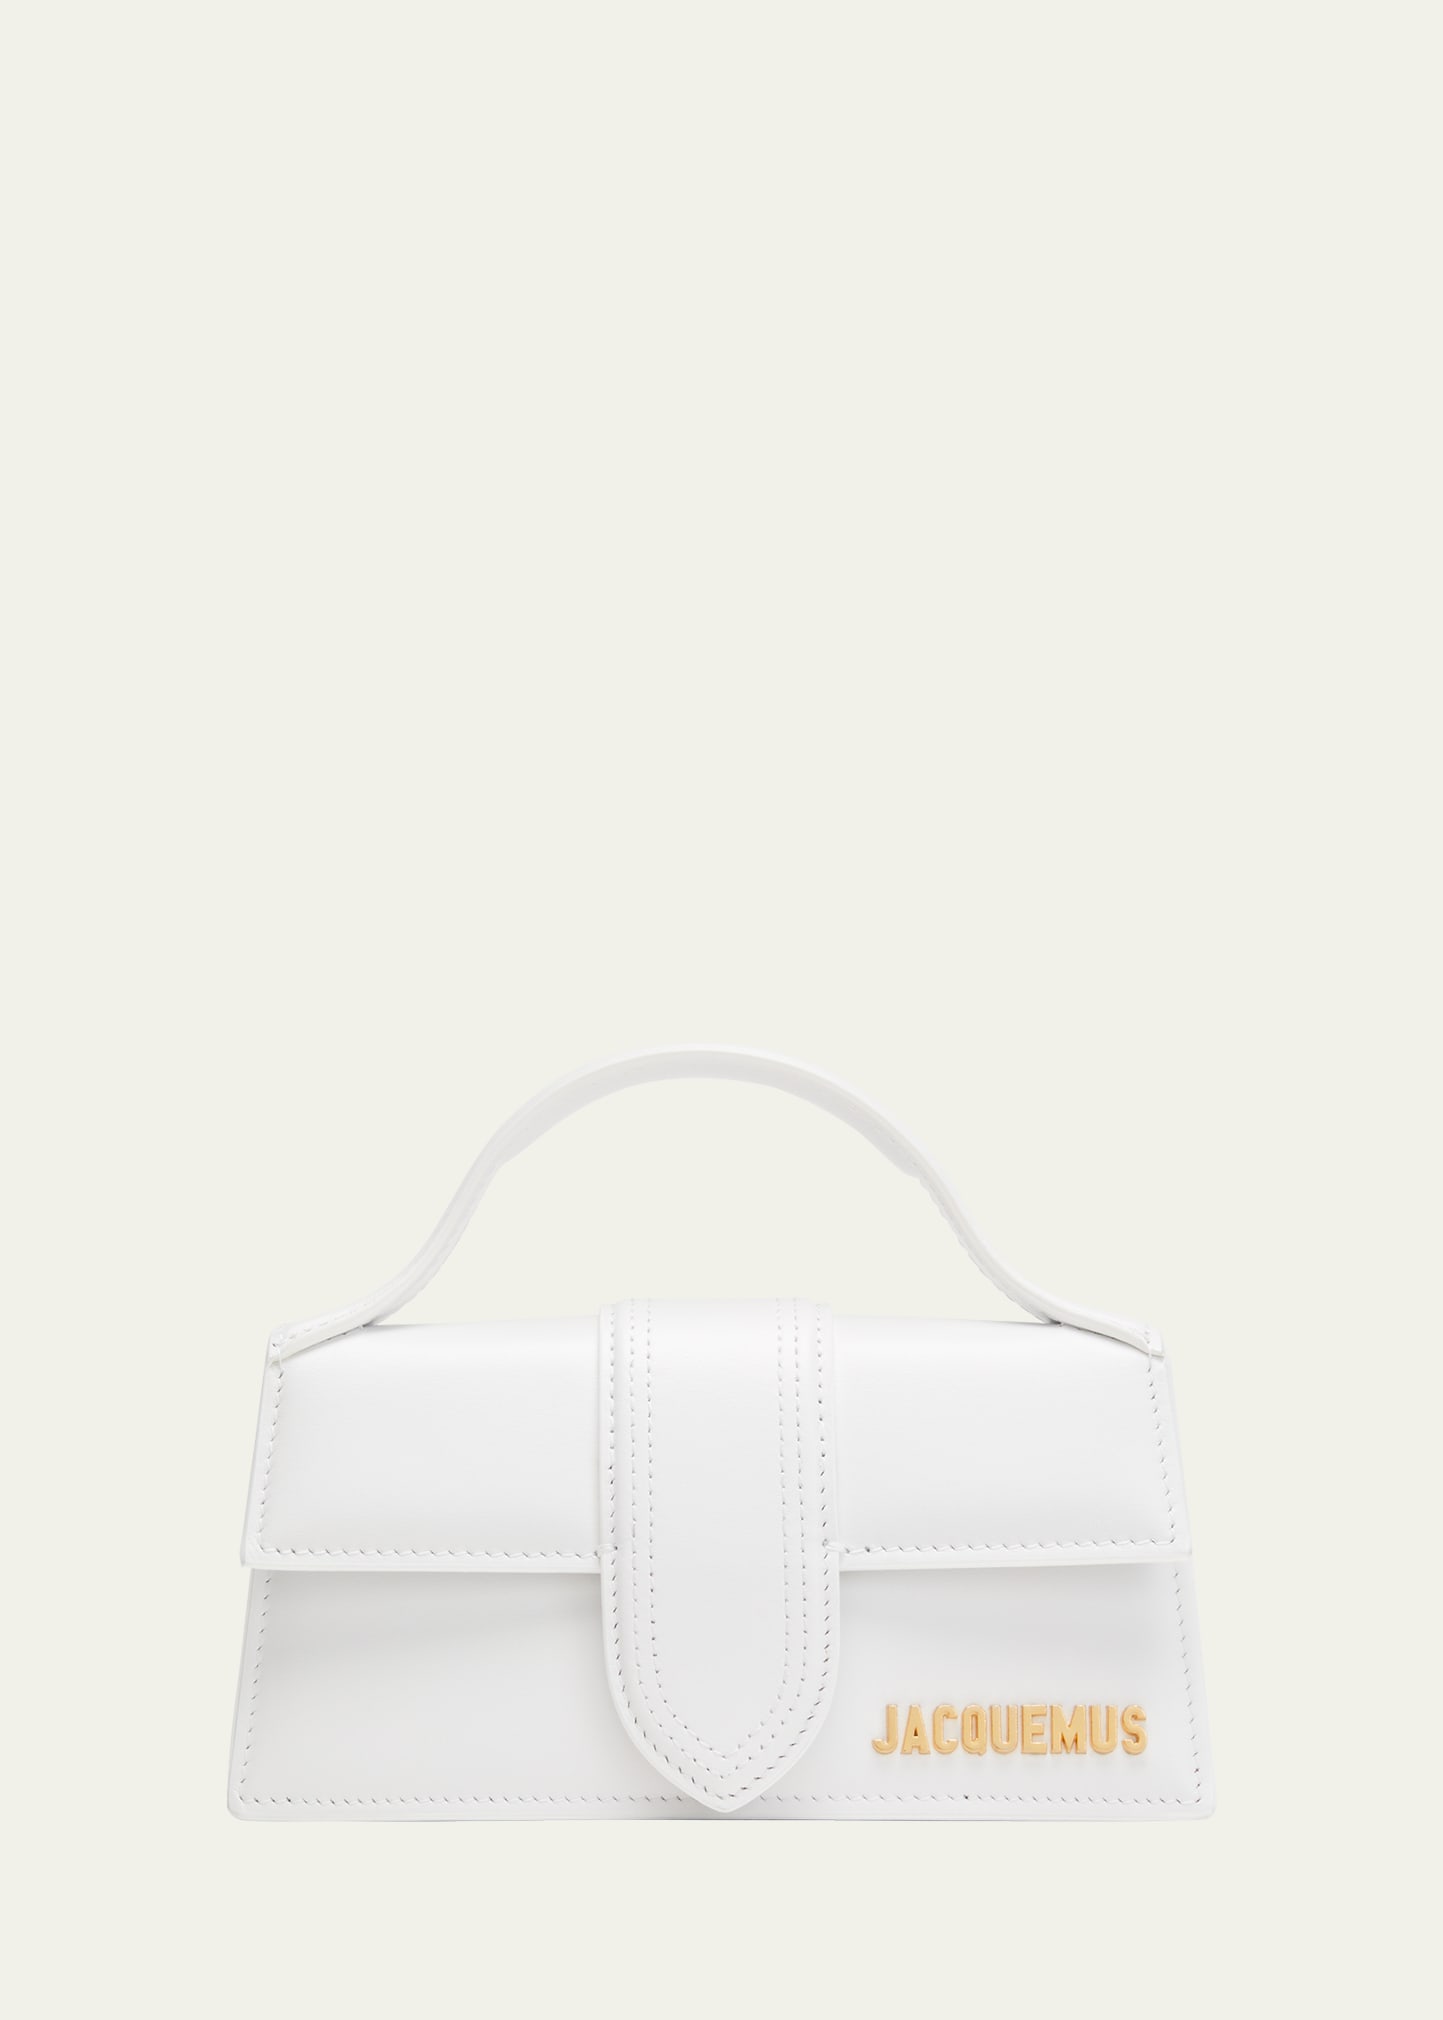 Jacquemus Le Bambino Leather Satchel Bag In White